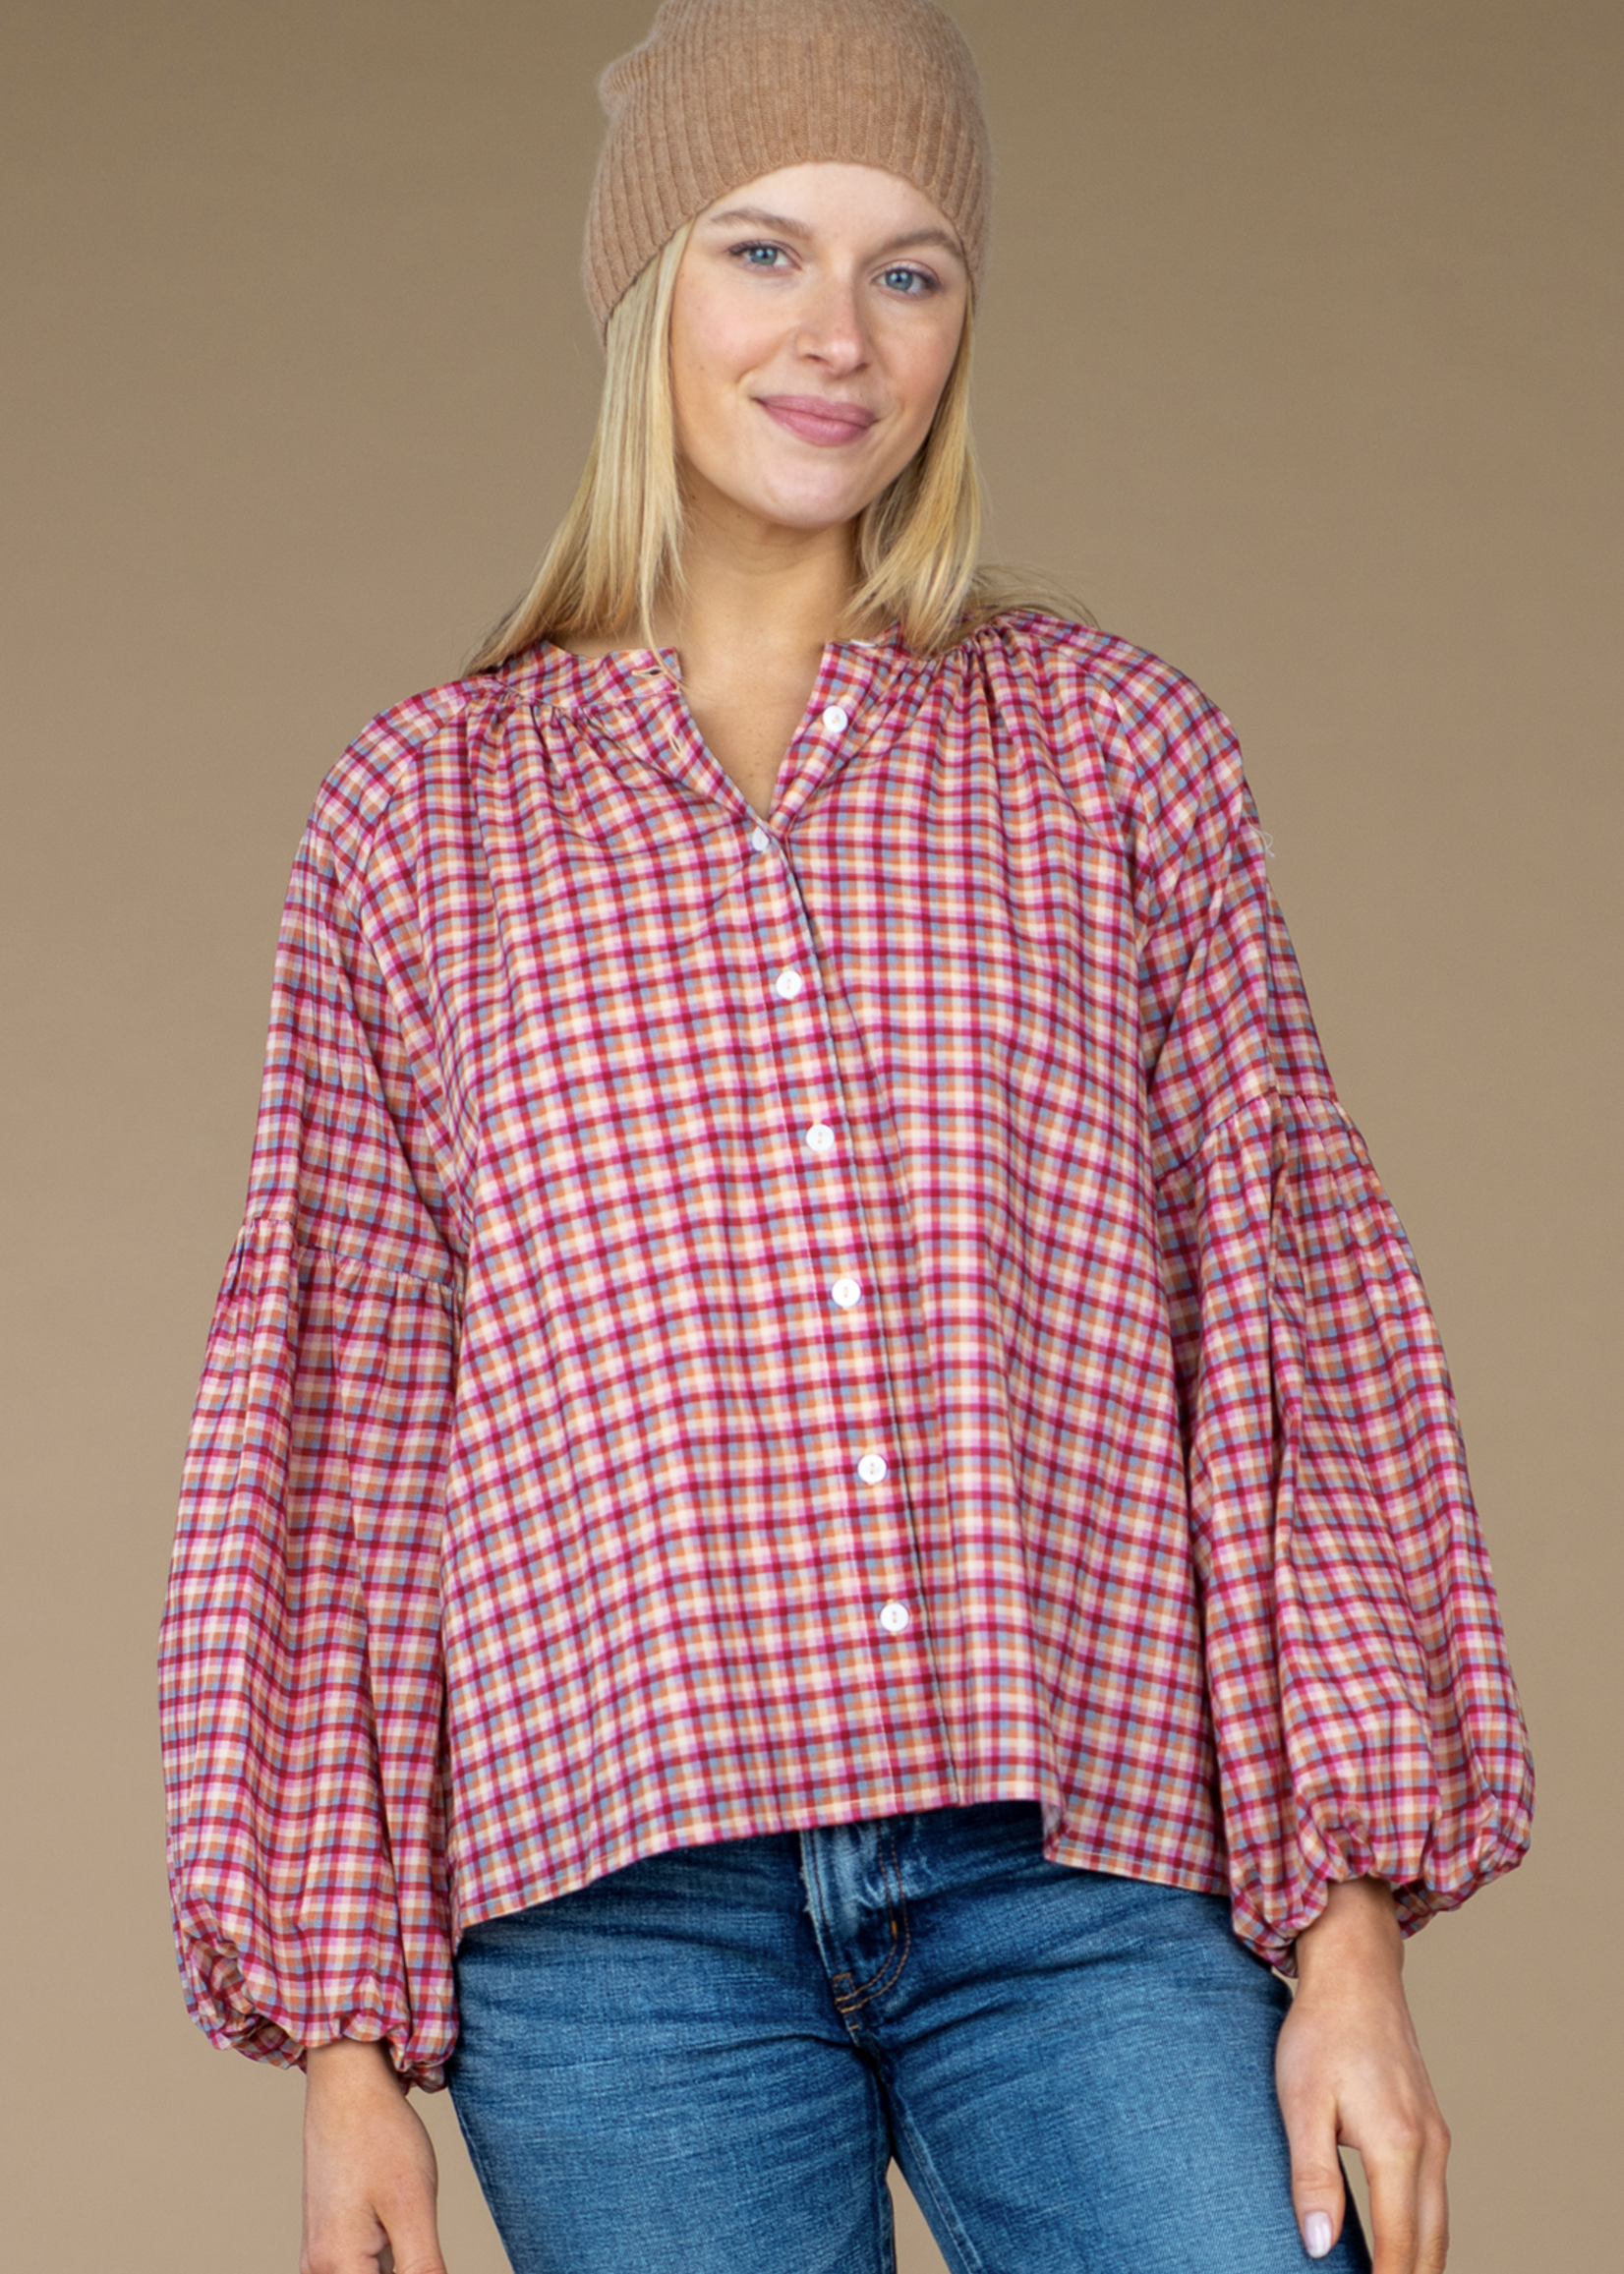 OLIVIA JAMES THE LABEL EMORY TOP